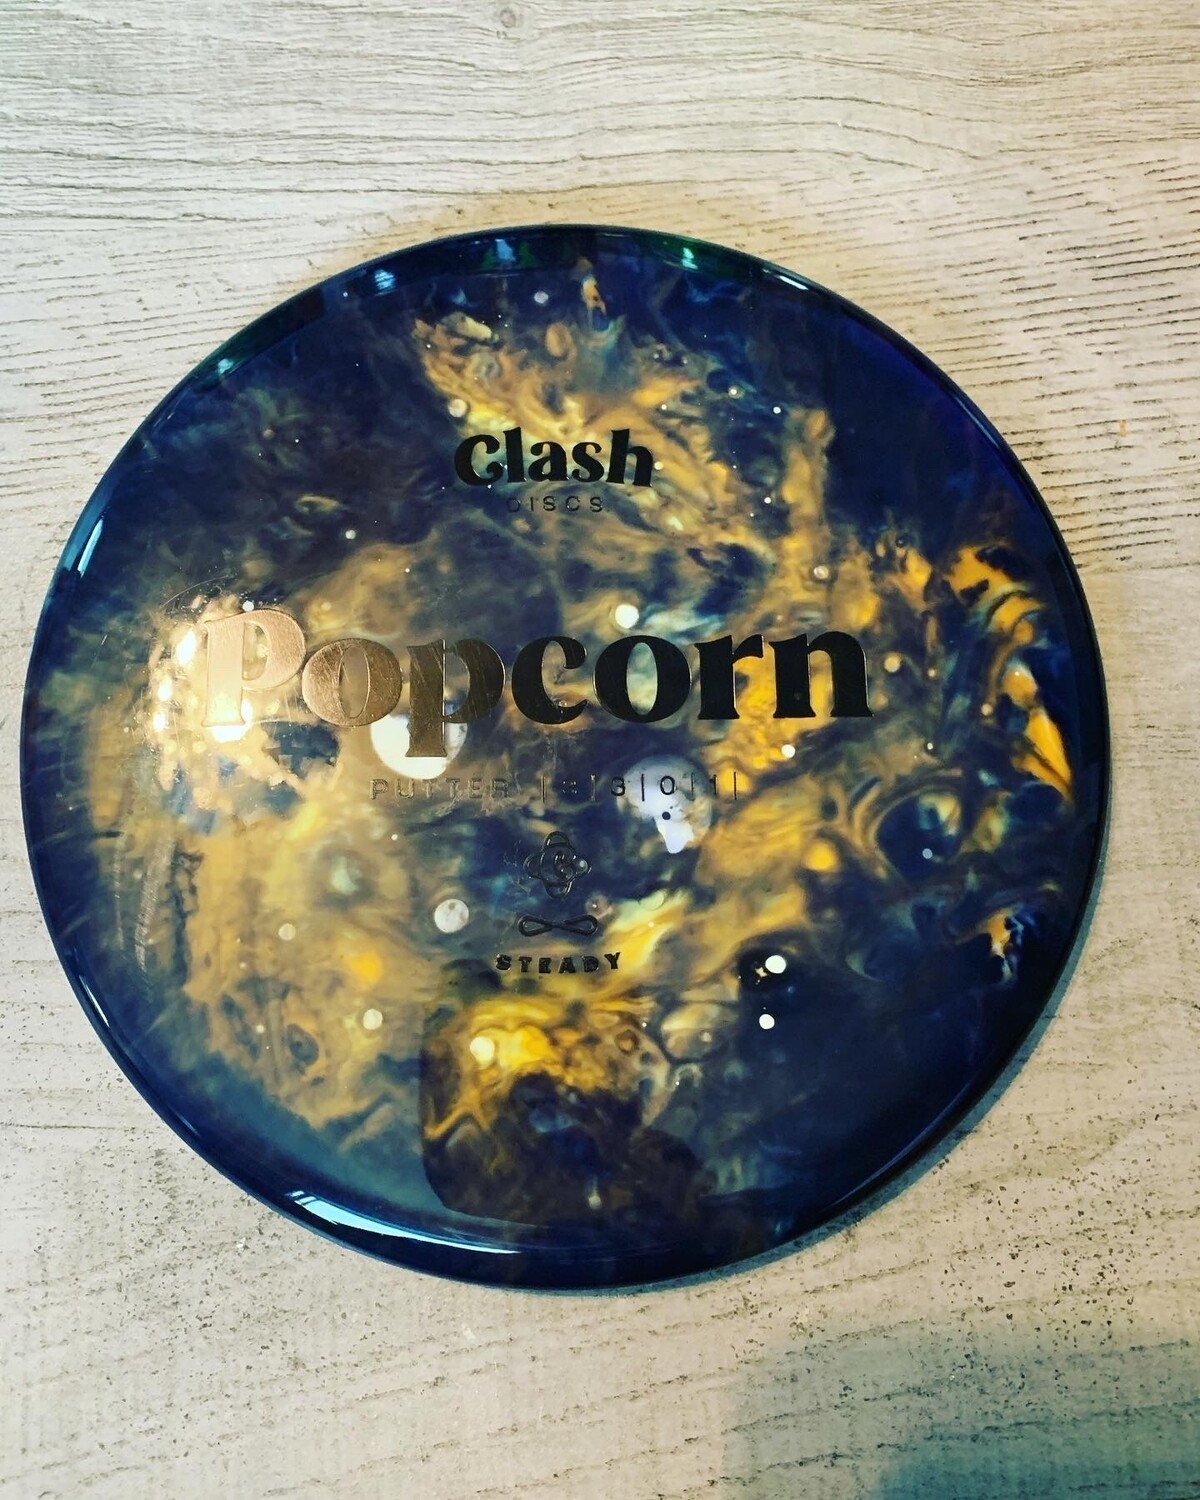 Clash Popcorn Blue Galaxy/
Never been thrown. Includes Free Shipping!